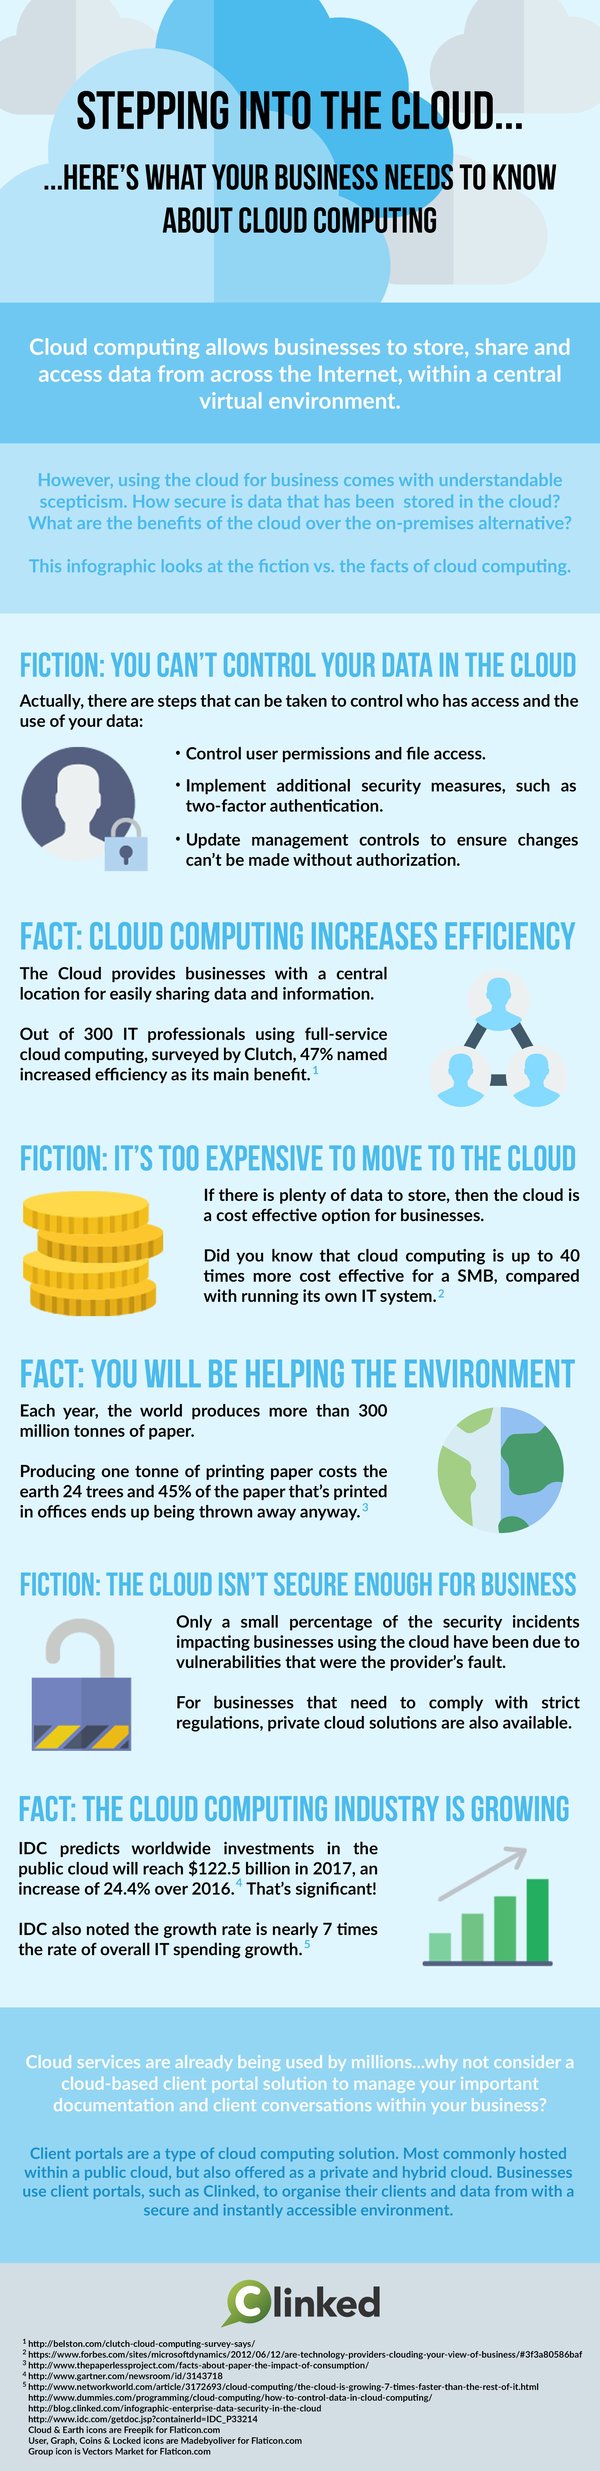 Cloud computing for business fact vs fiction infographic